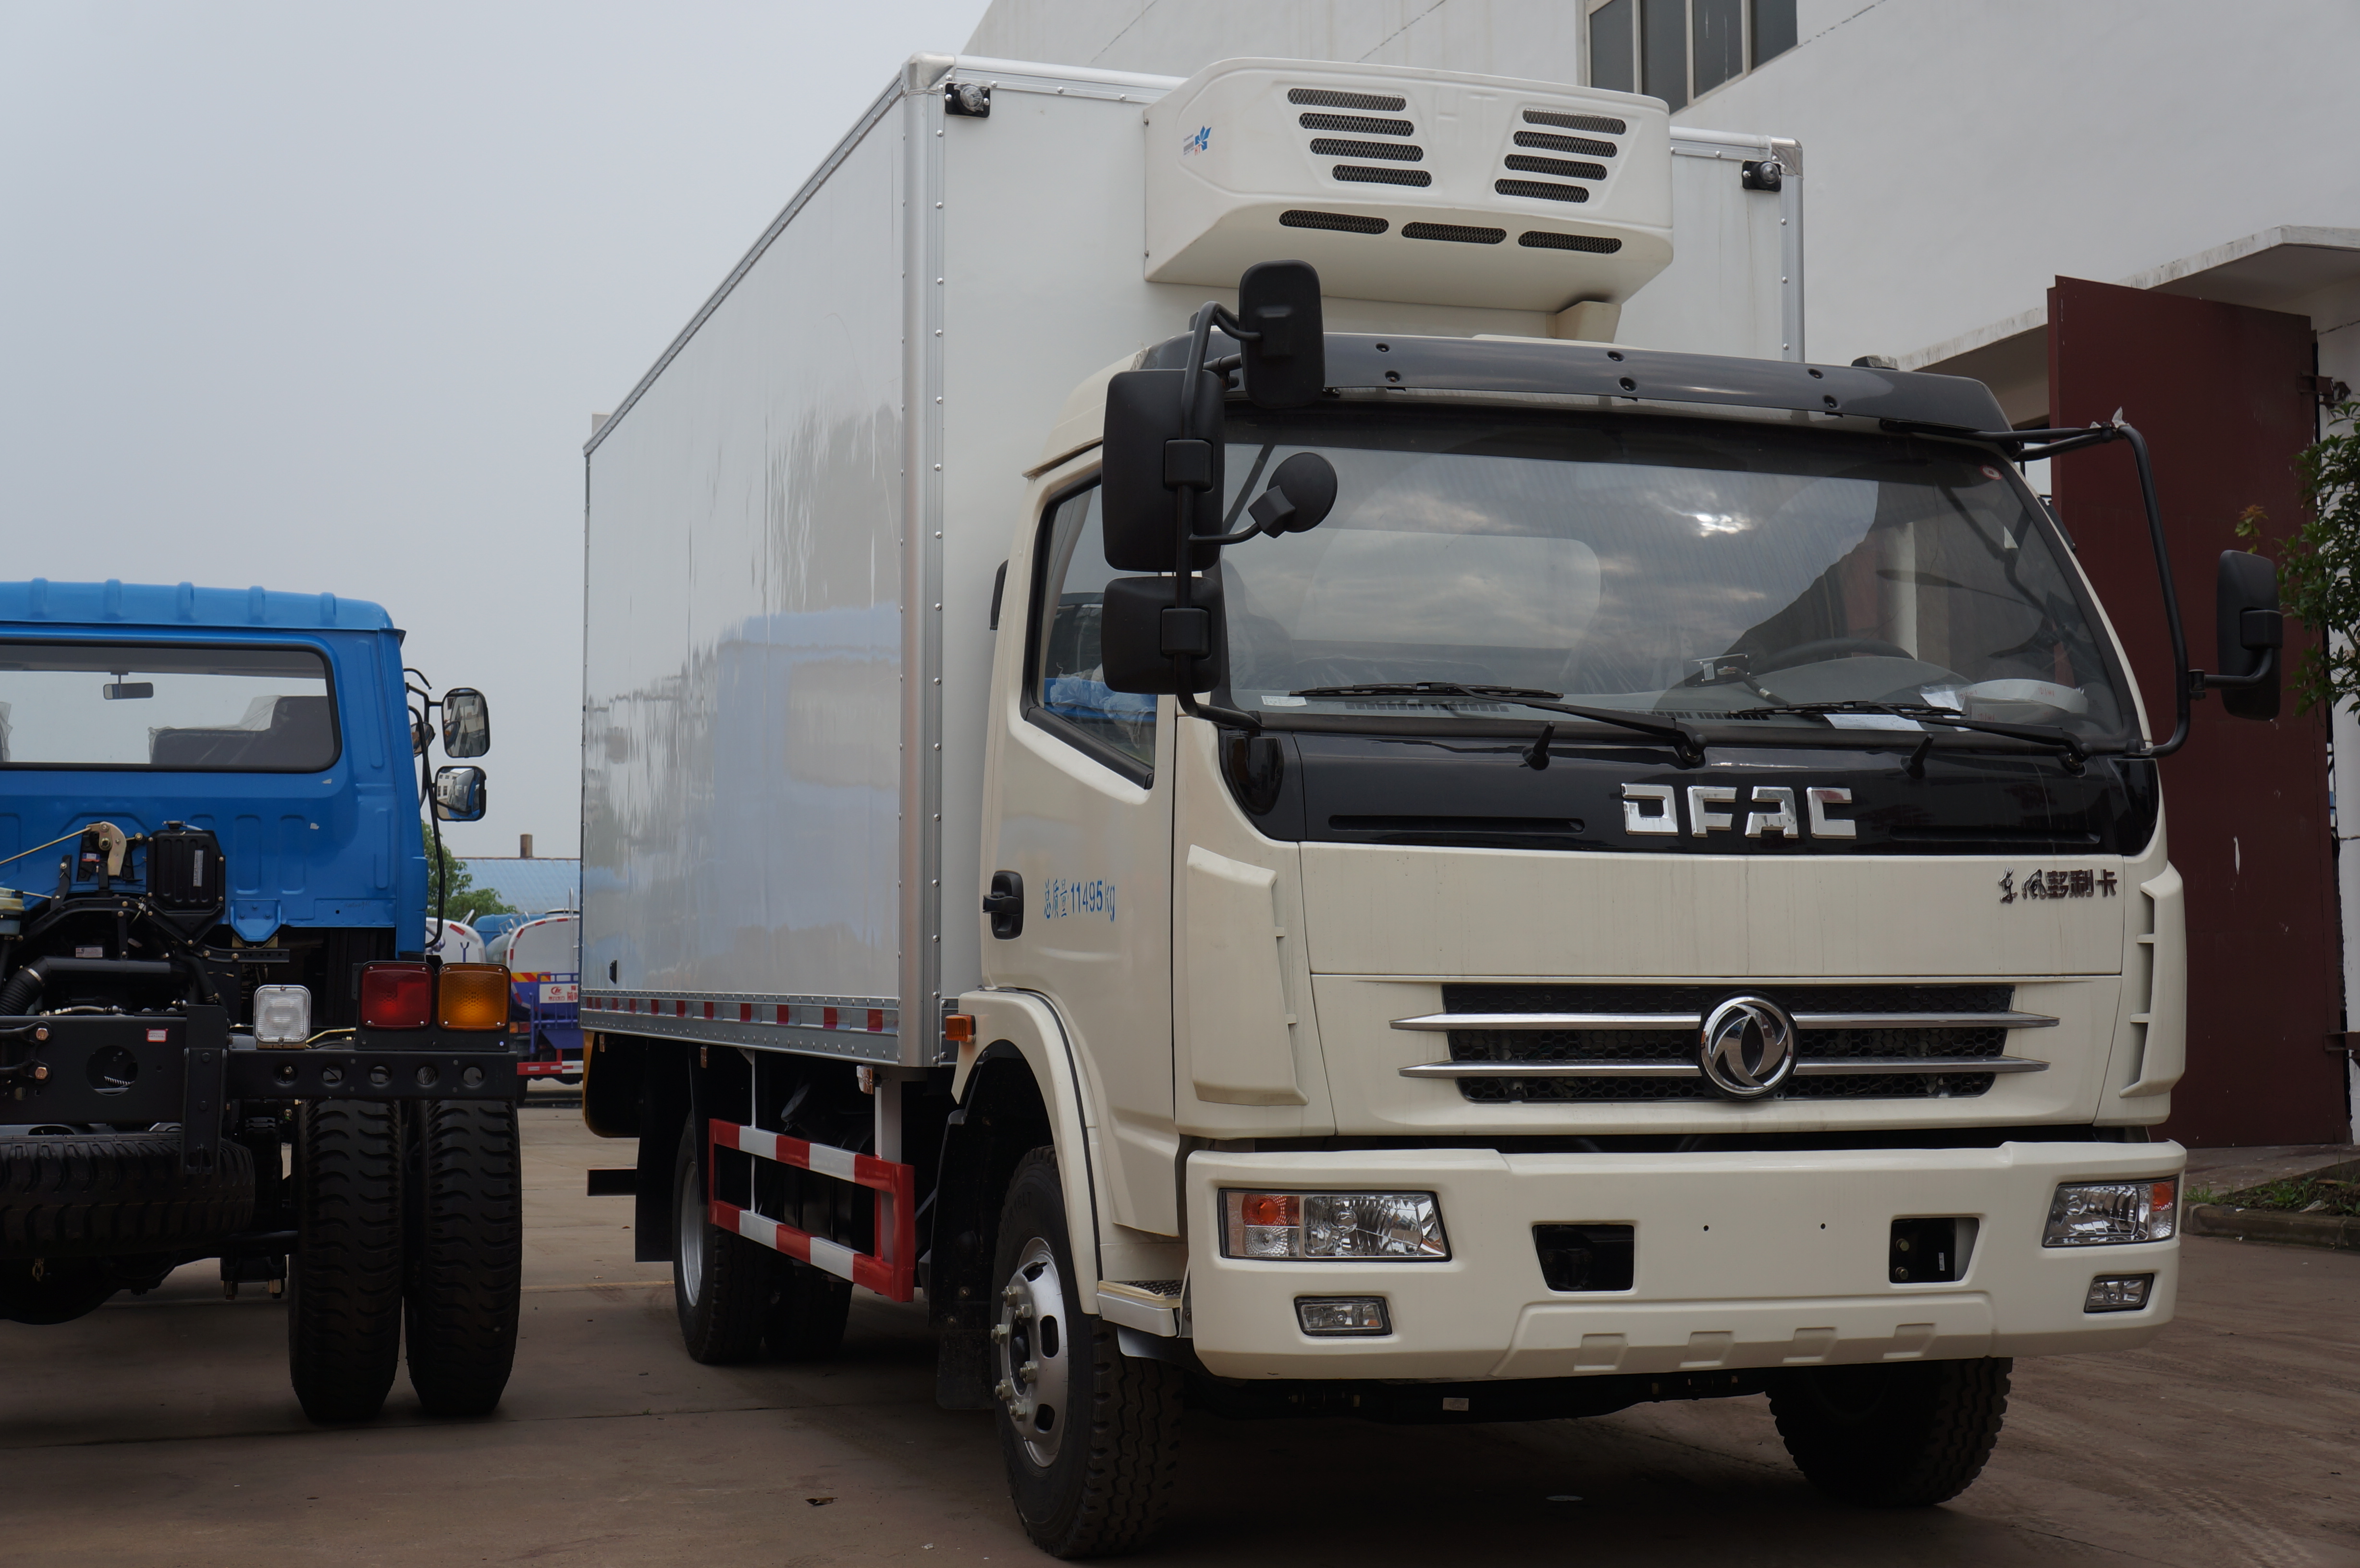 [Refrigerated truck knowledge 1] How to choose a refrigerated truck?